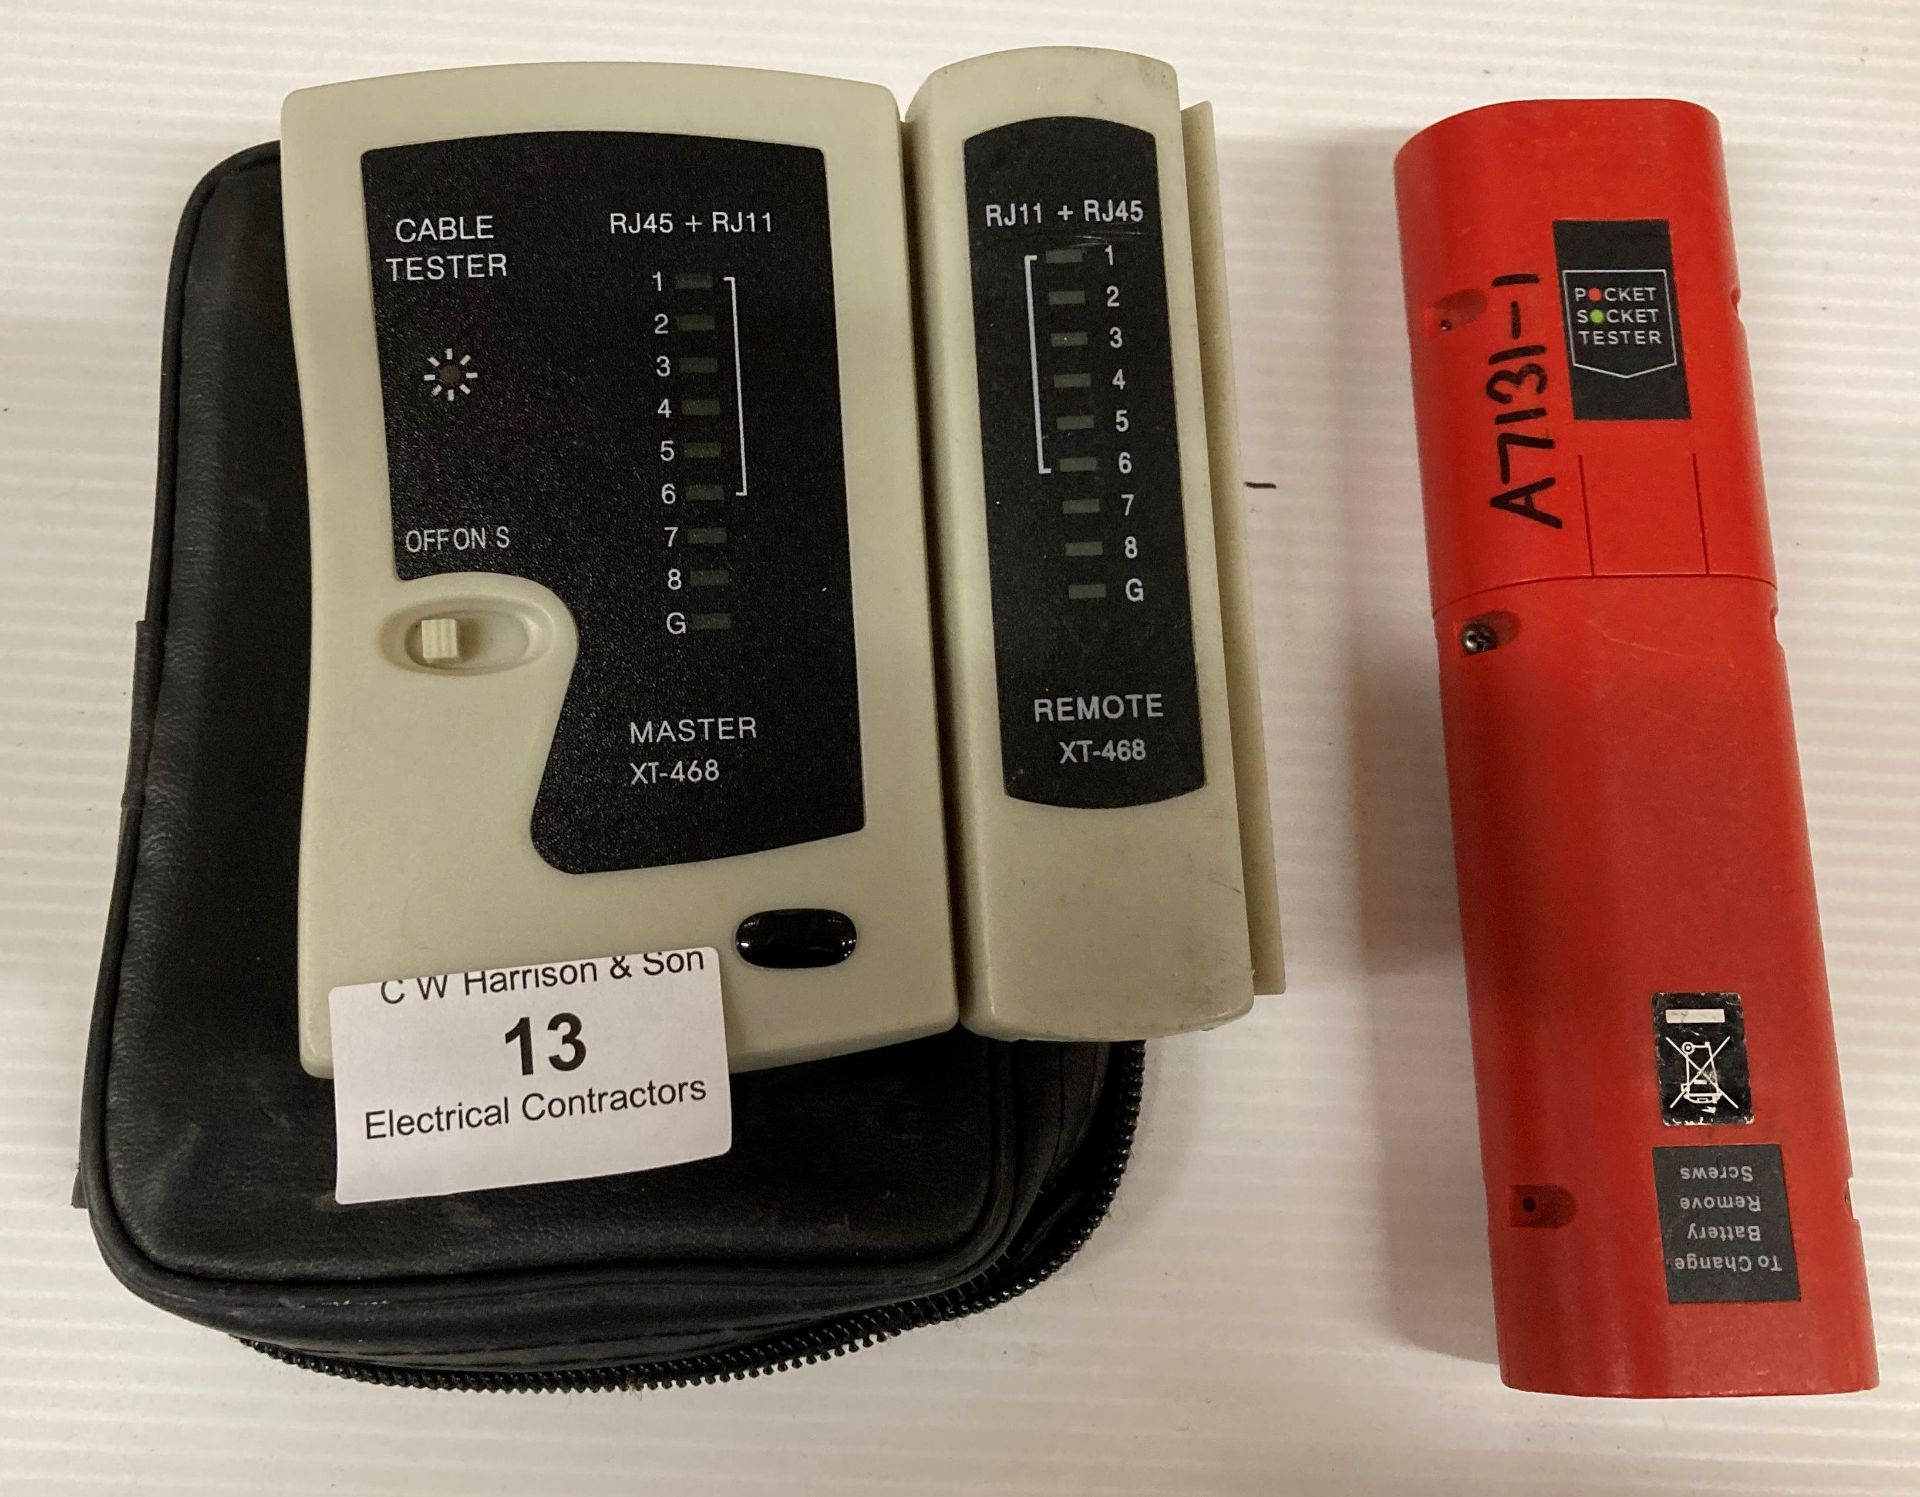 2 items - cable tester XT468 and a pocket socket tester (Saleroom location: F07)